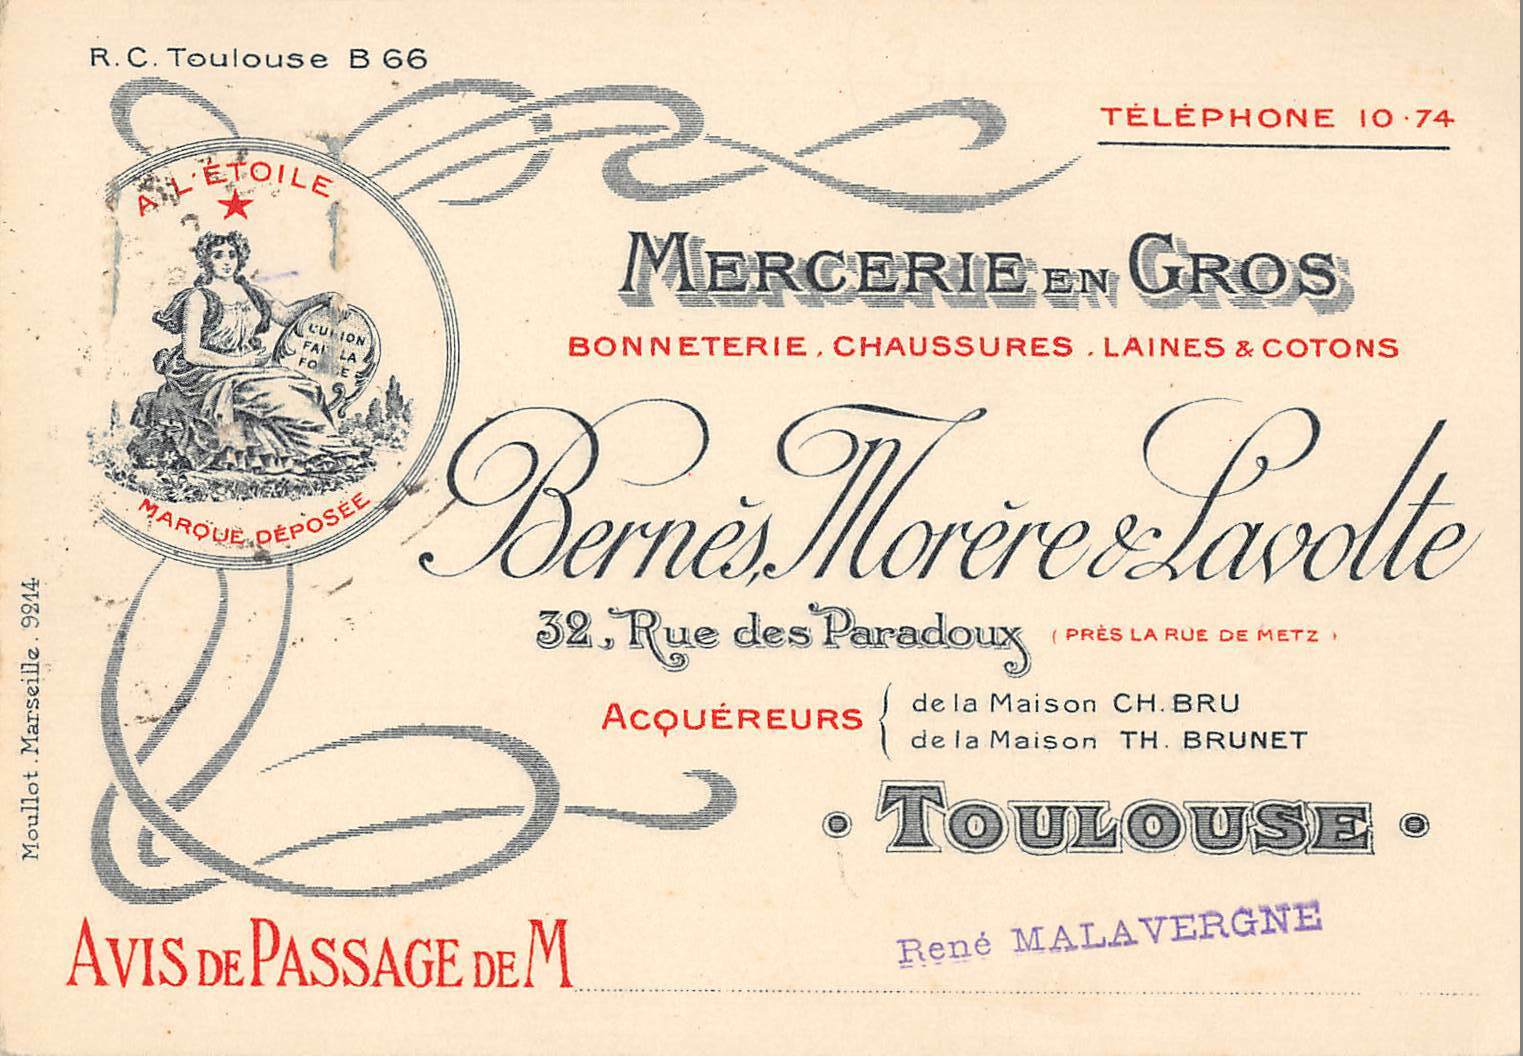 CPA 31 TOULOUSE RARE CPA ADVERTISING MERCERIE WHOLESALE BERNES MORERE LAVOLTE